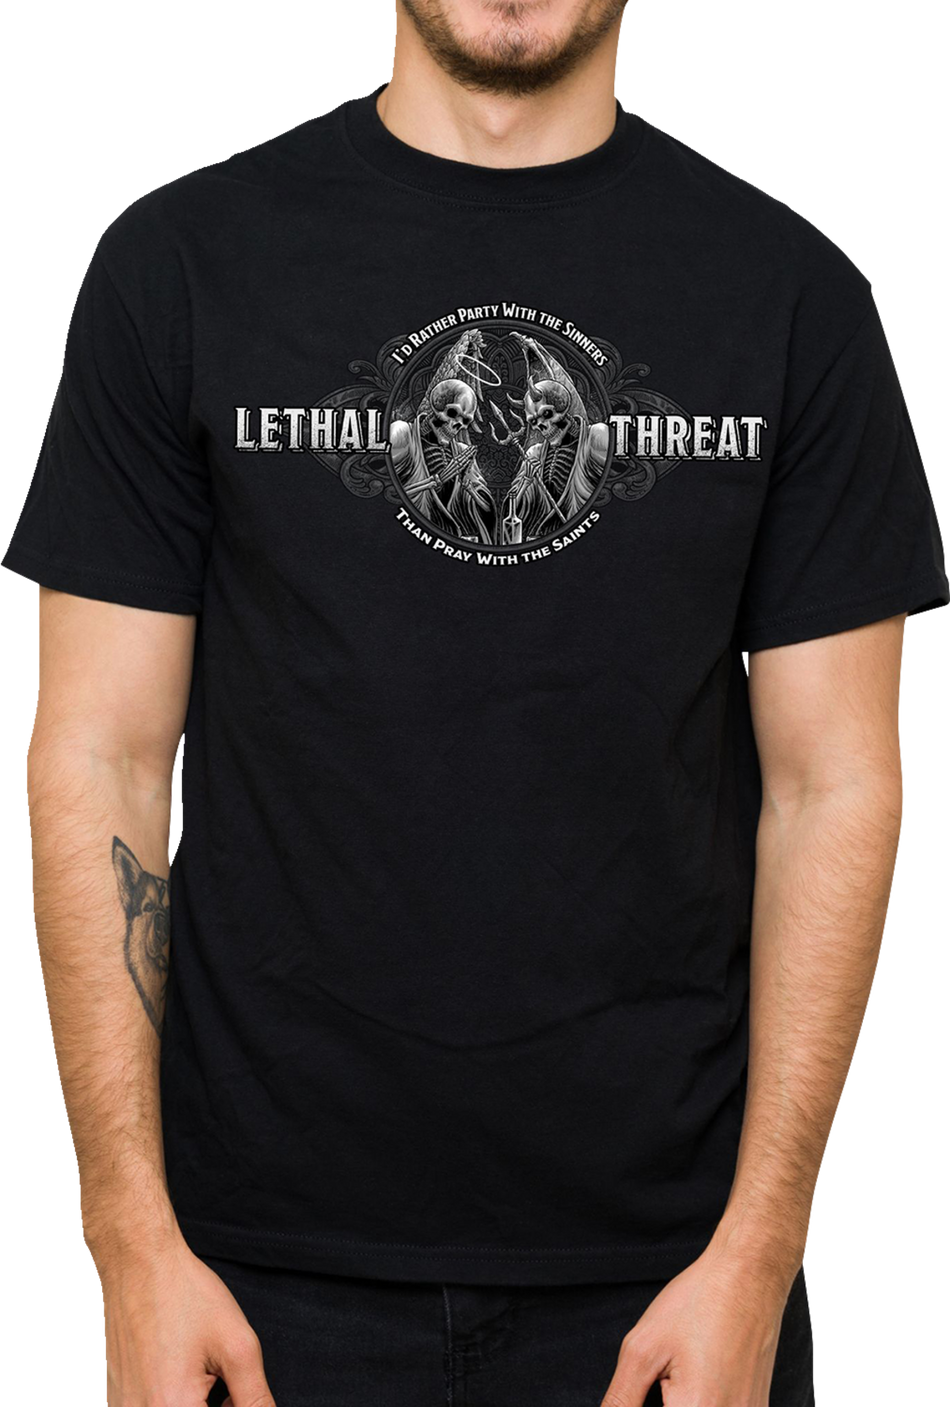 LETHAL THREAT Party with the Sinners T-Shirt - Black - Medium LT20905M